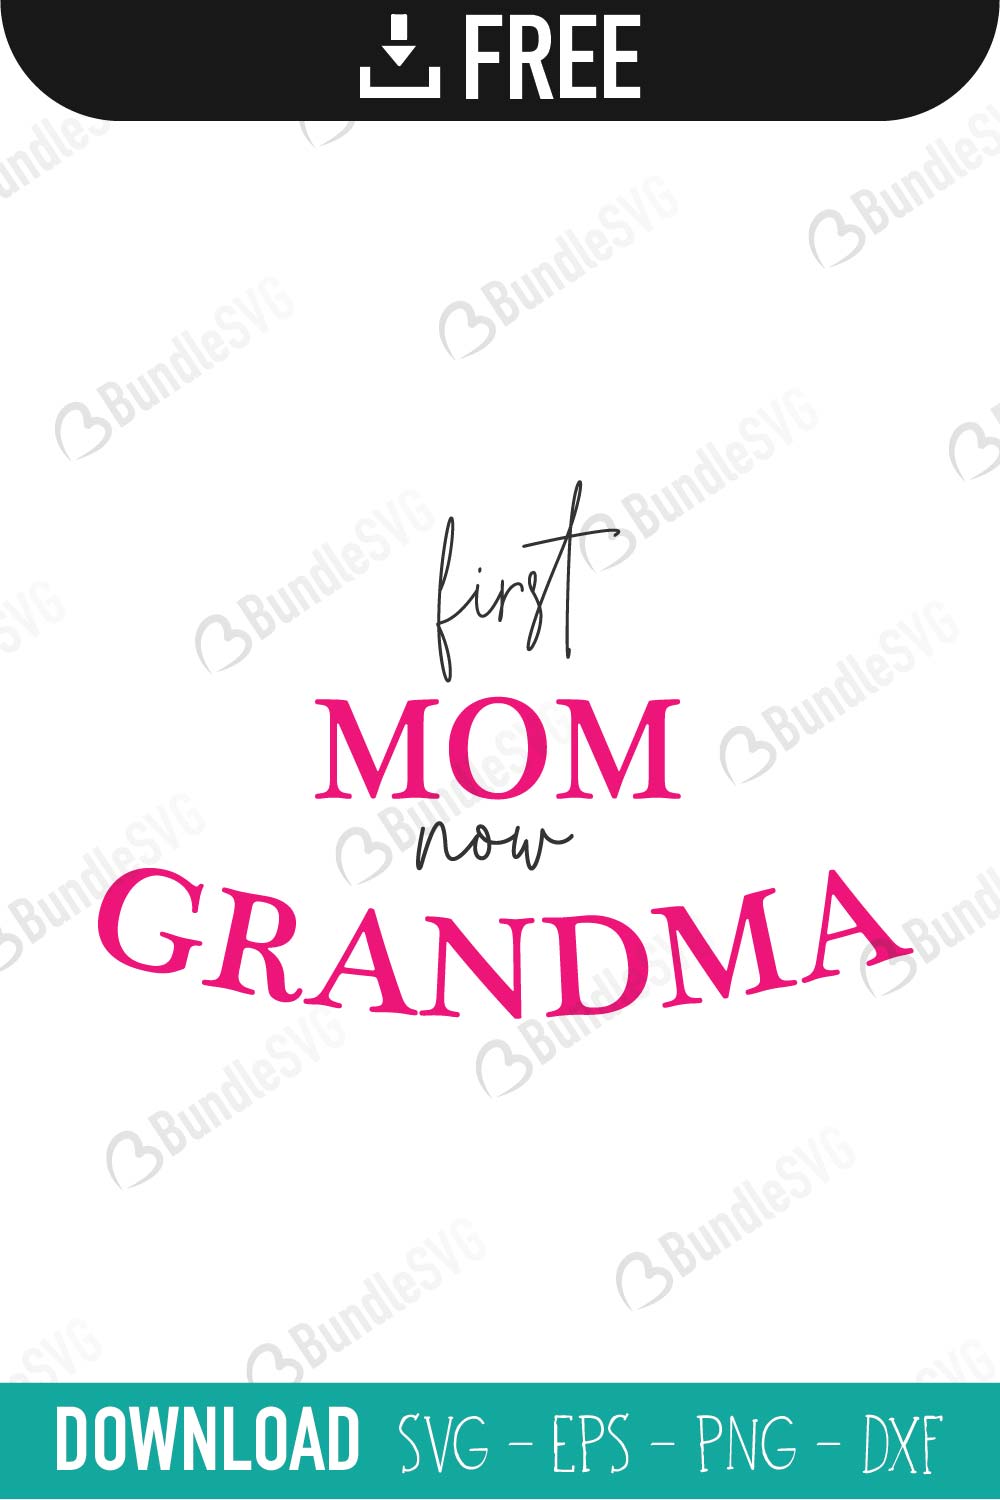 Download First Mom Now Grandma SVG Cut Files Free Download ...